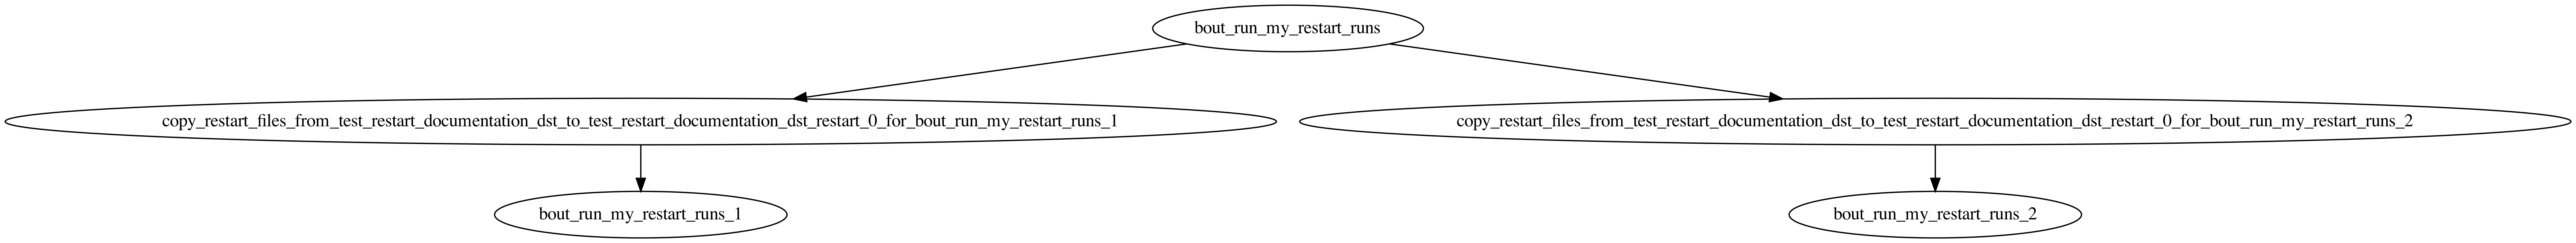 Graph of chained restarts with alterations from BoutRunners